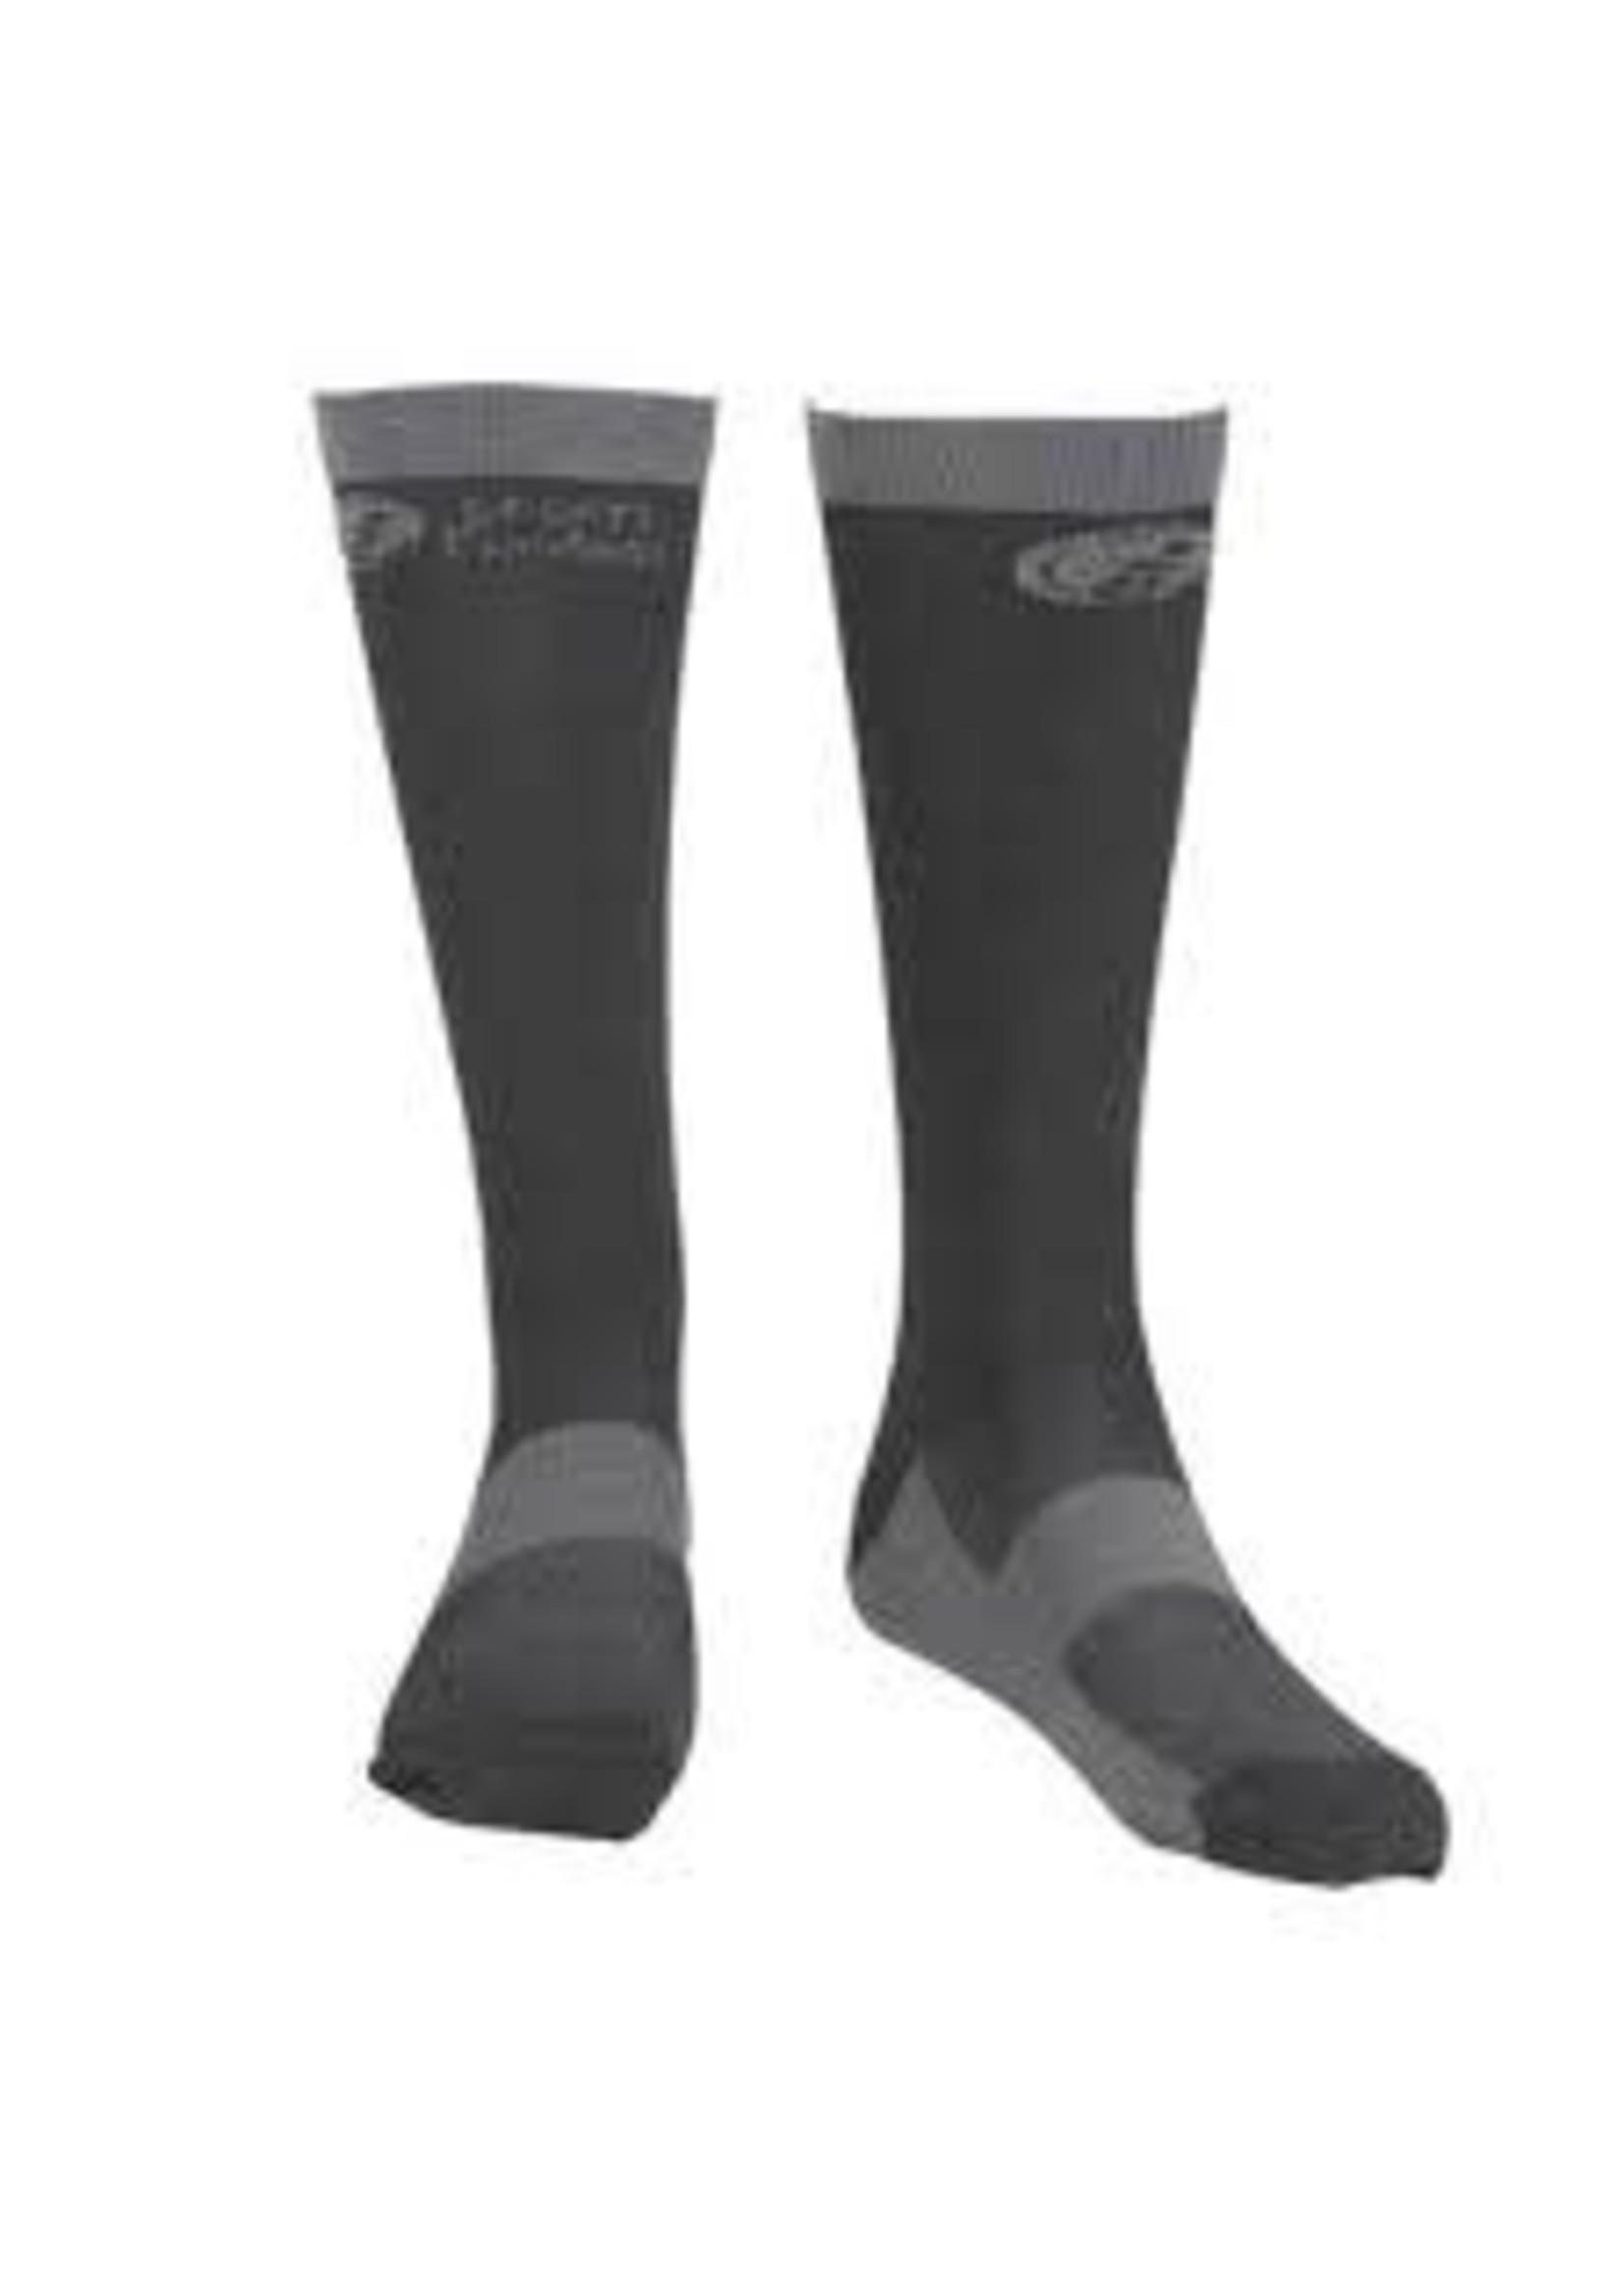 SPORT EXCELLENCE SPORTS EXCELLENCE PERFORMANCE SOCKS JR 2-6